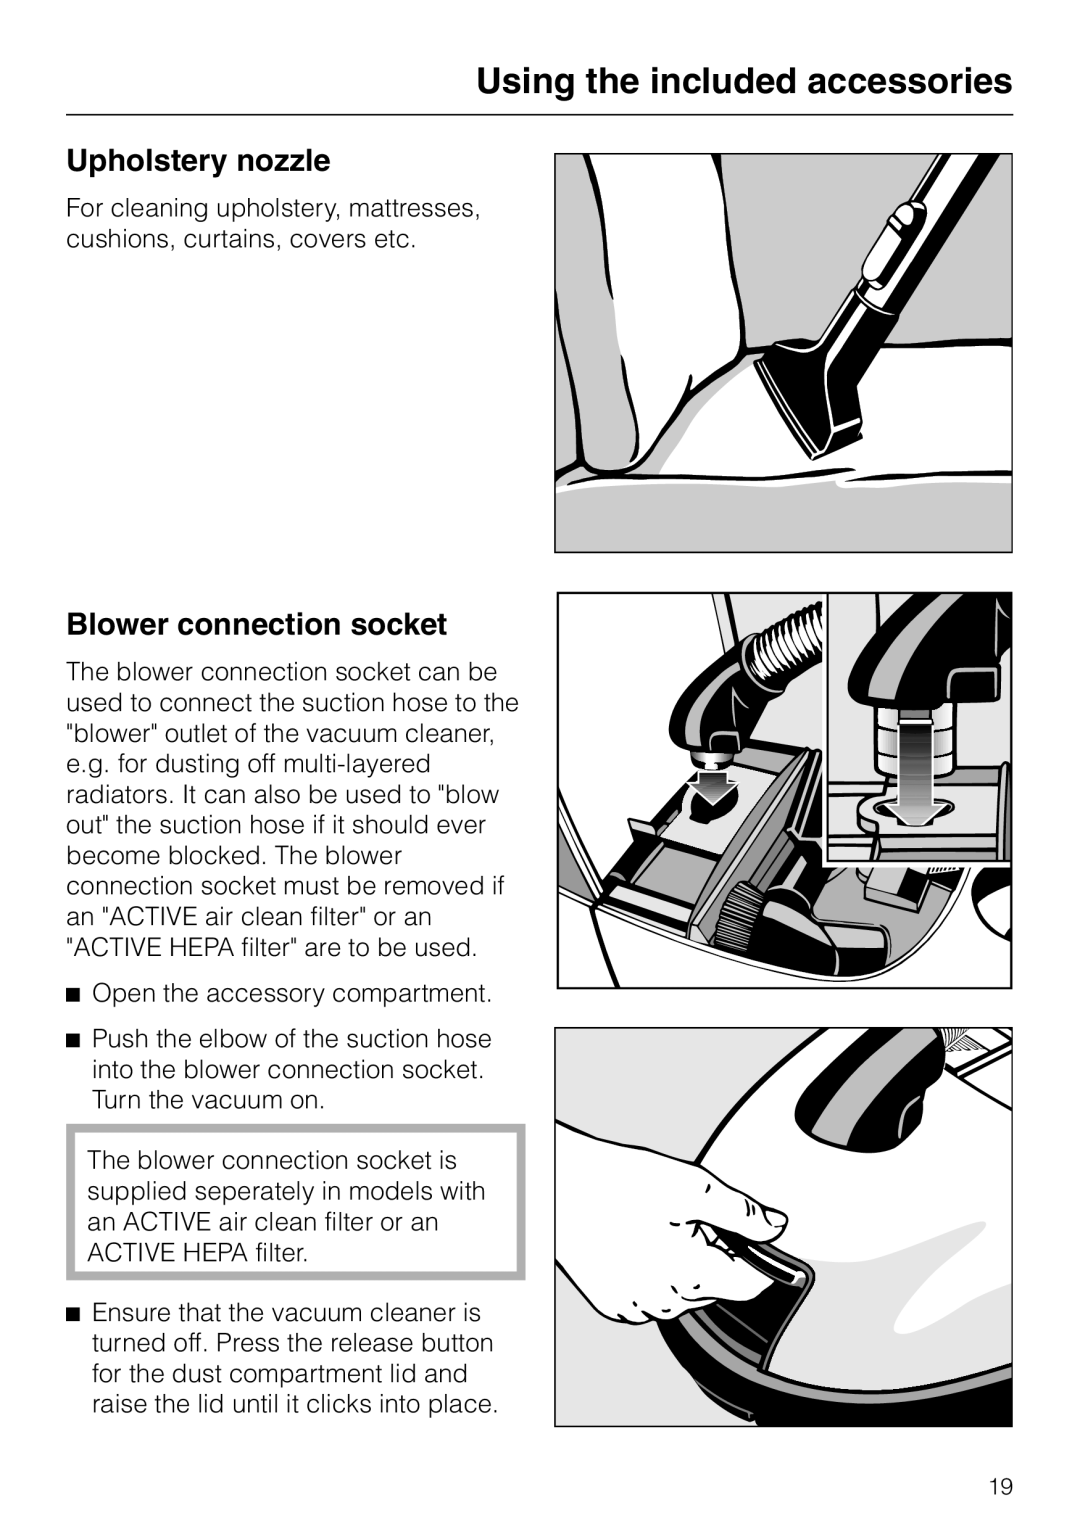 Miele S 300i - S 318i operating instructions Upholstery nozzle, Blower connection socket, Using the included accessories 